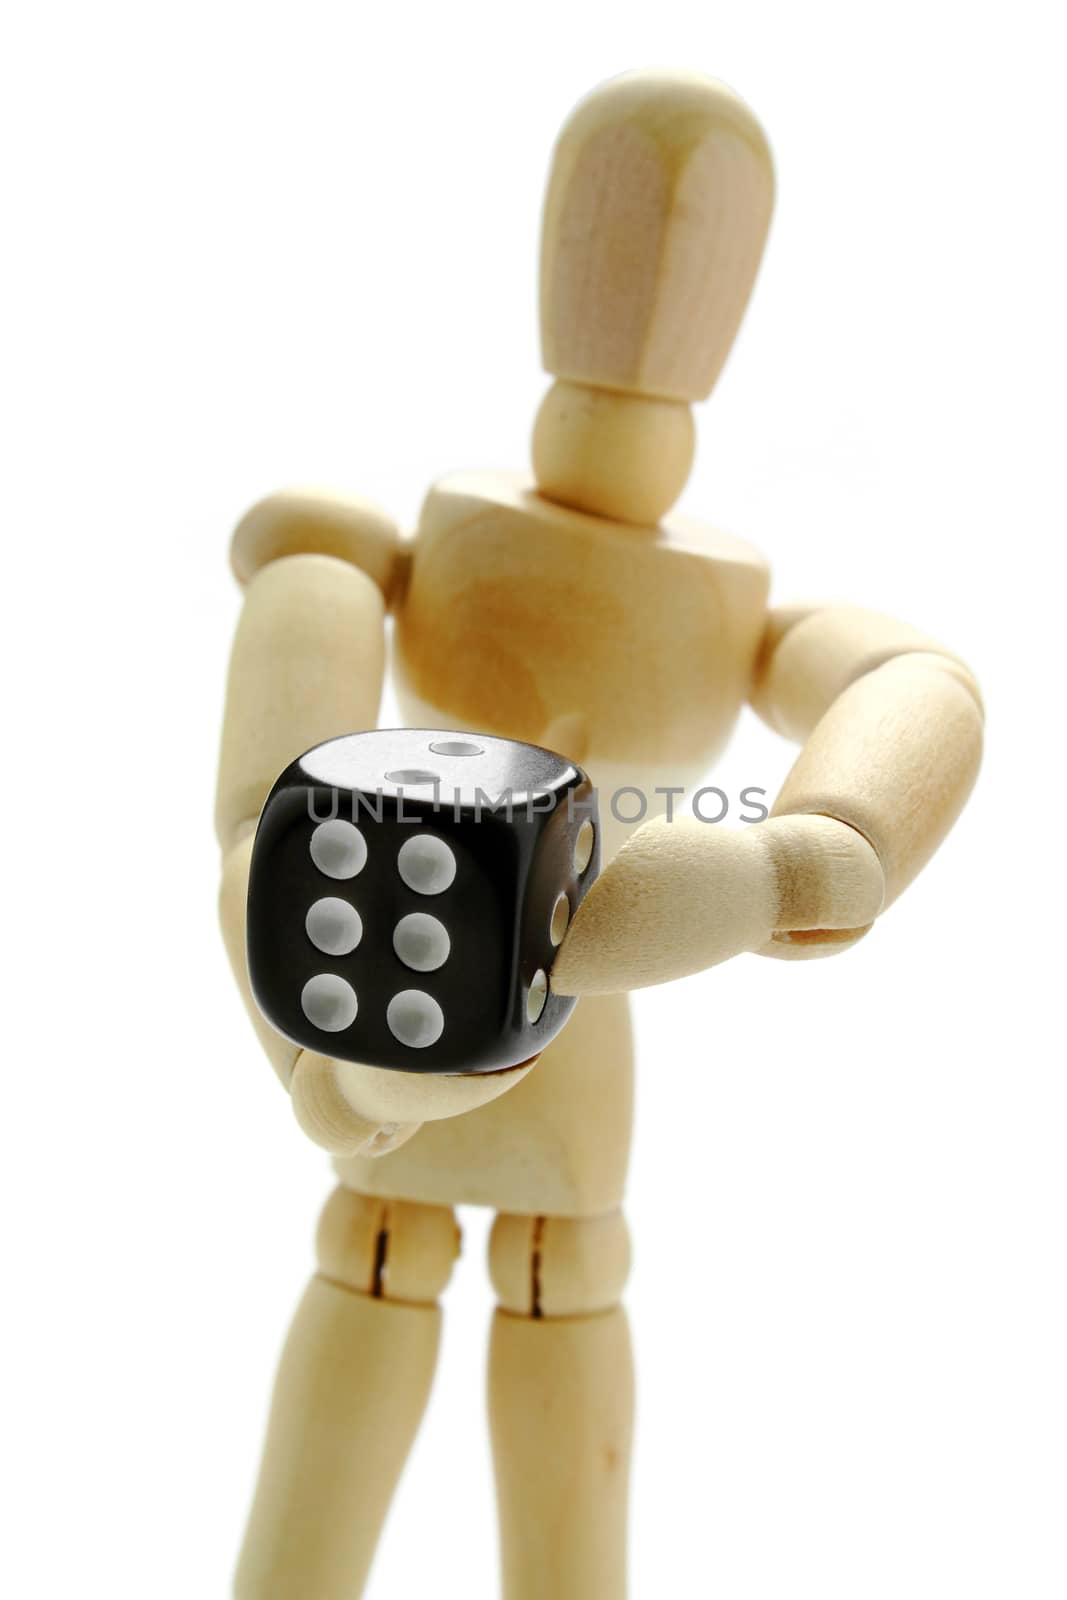 Wooden manikin and dice by dynamicfoto